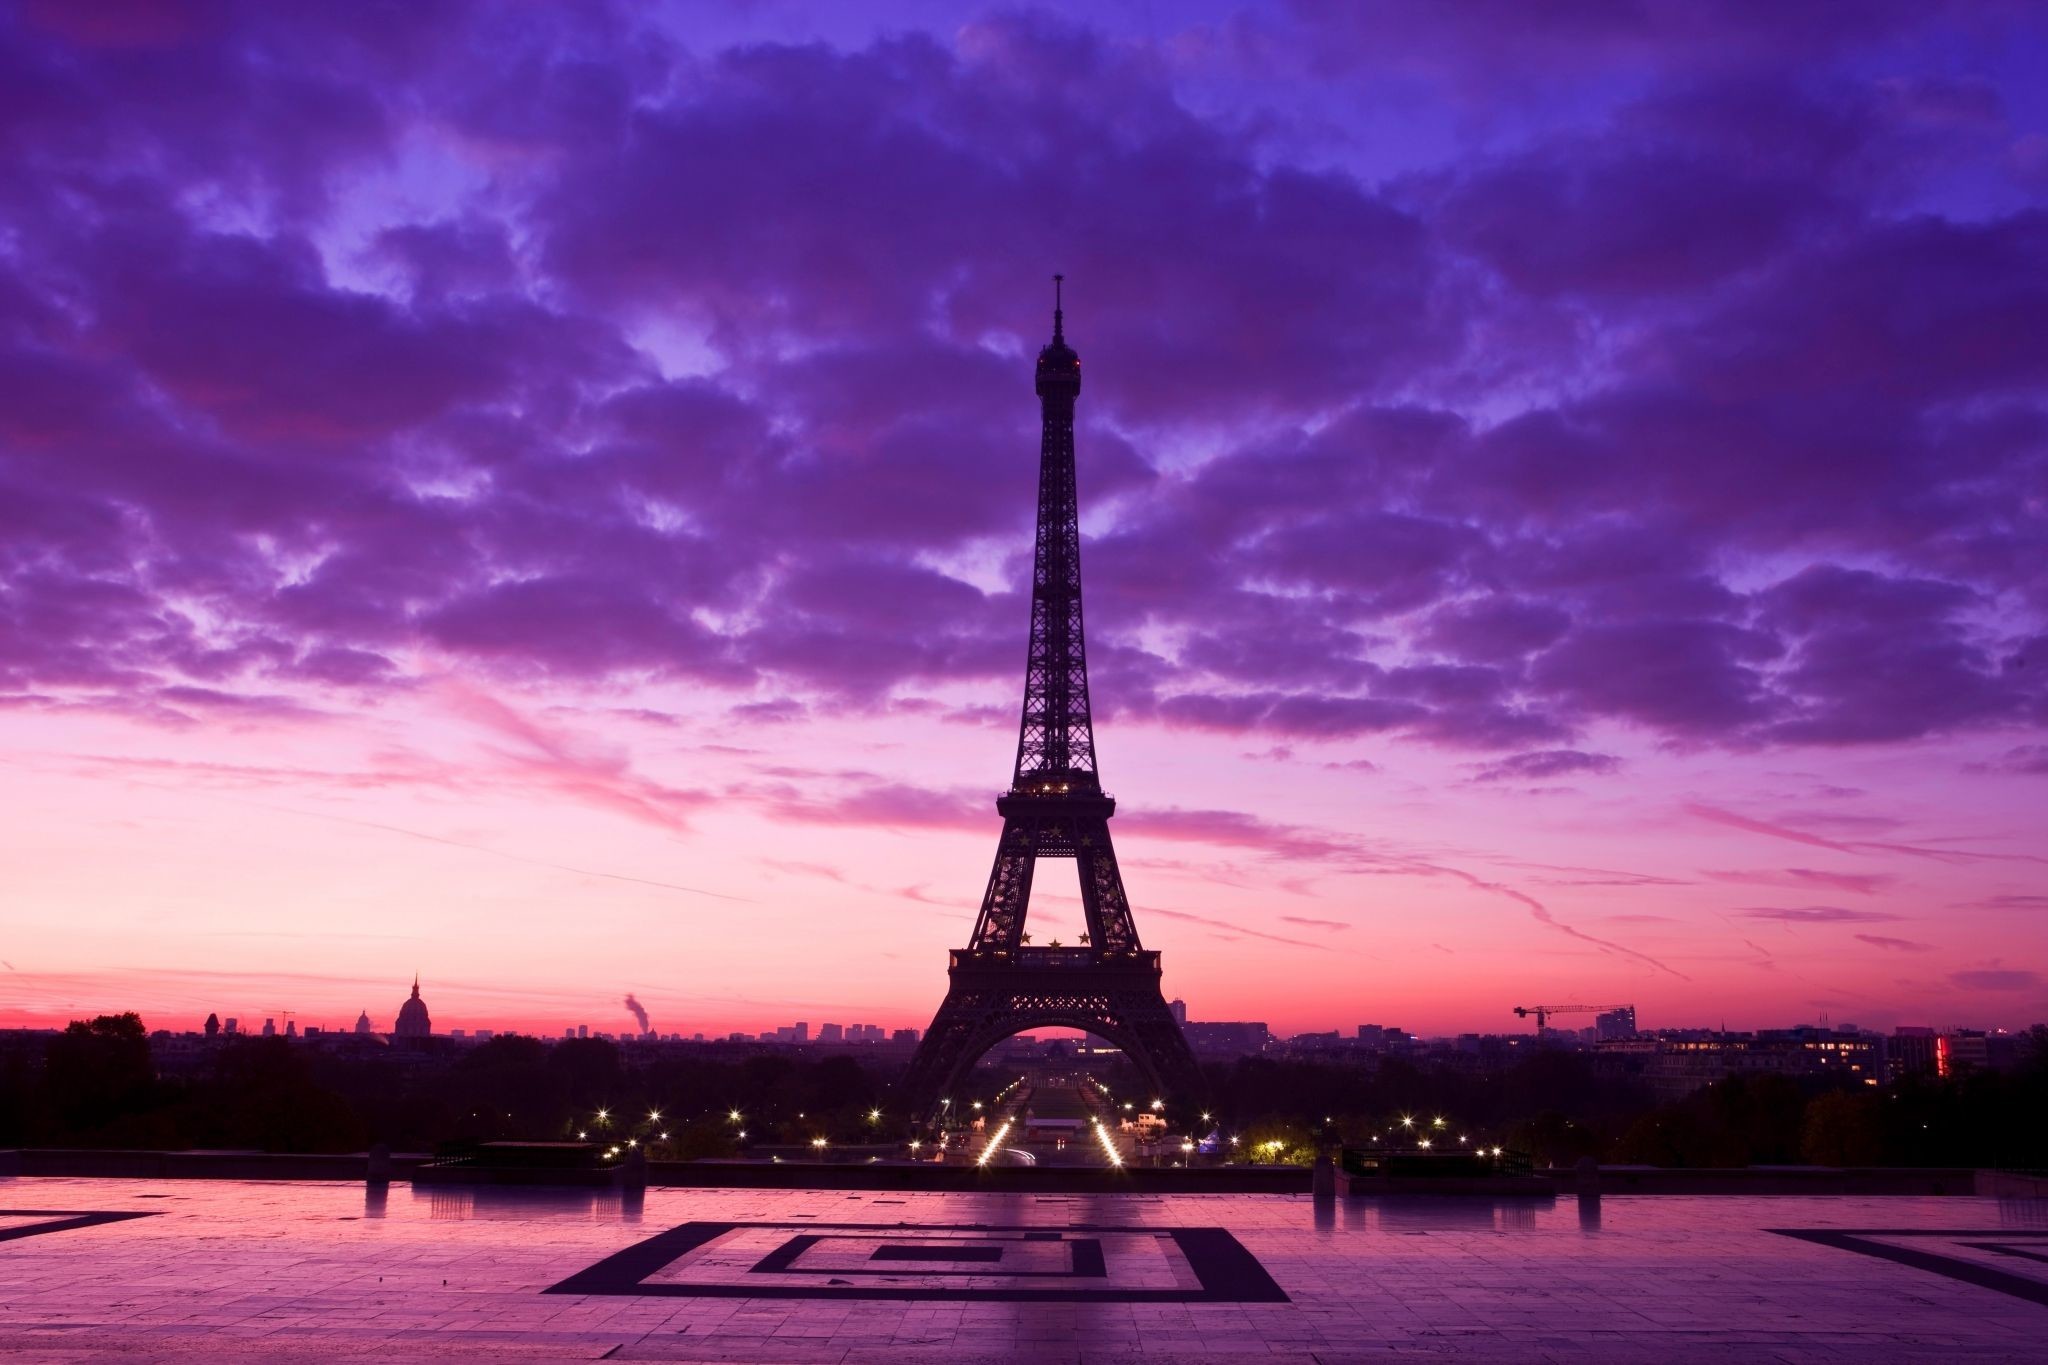 Theme Pink Paris Eiffel Tower APK 1.2.3 for Android – Download Theme Pink  Paris Eiffel Tower APK Latest Version from APKFab.com